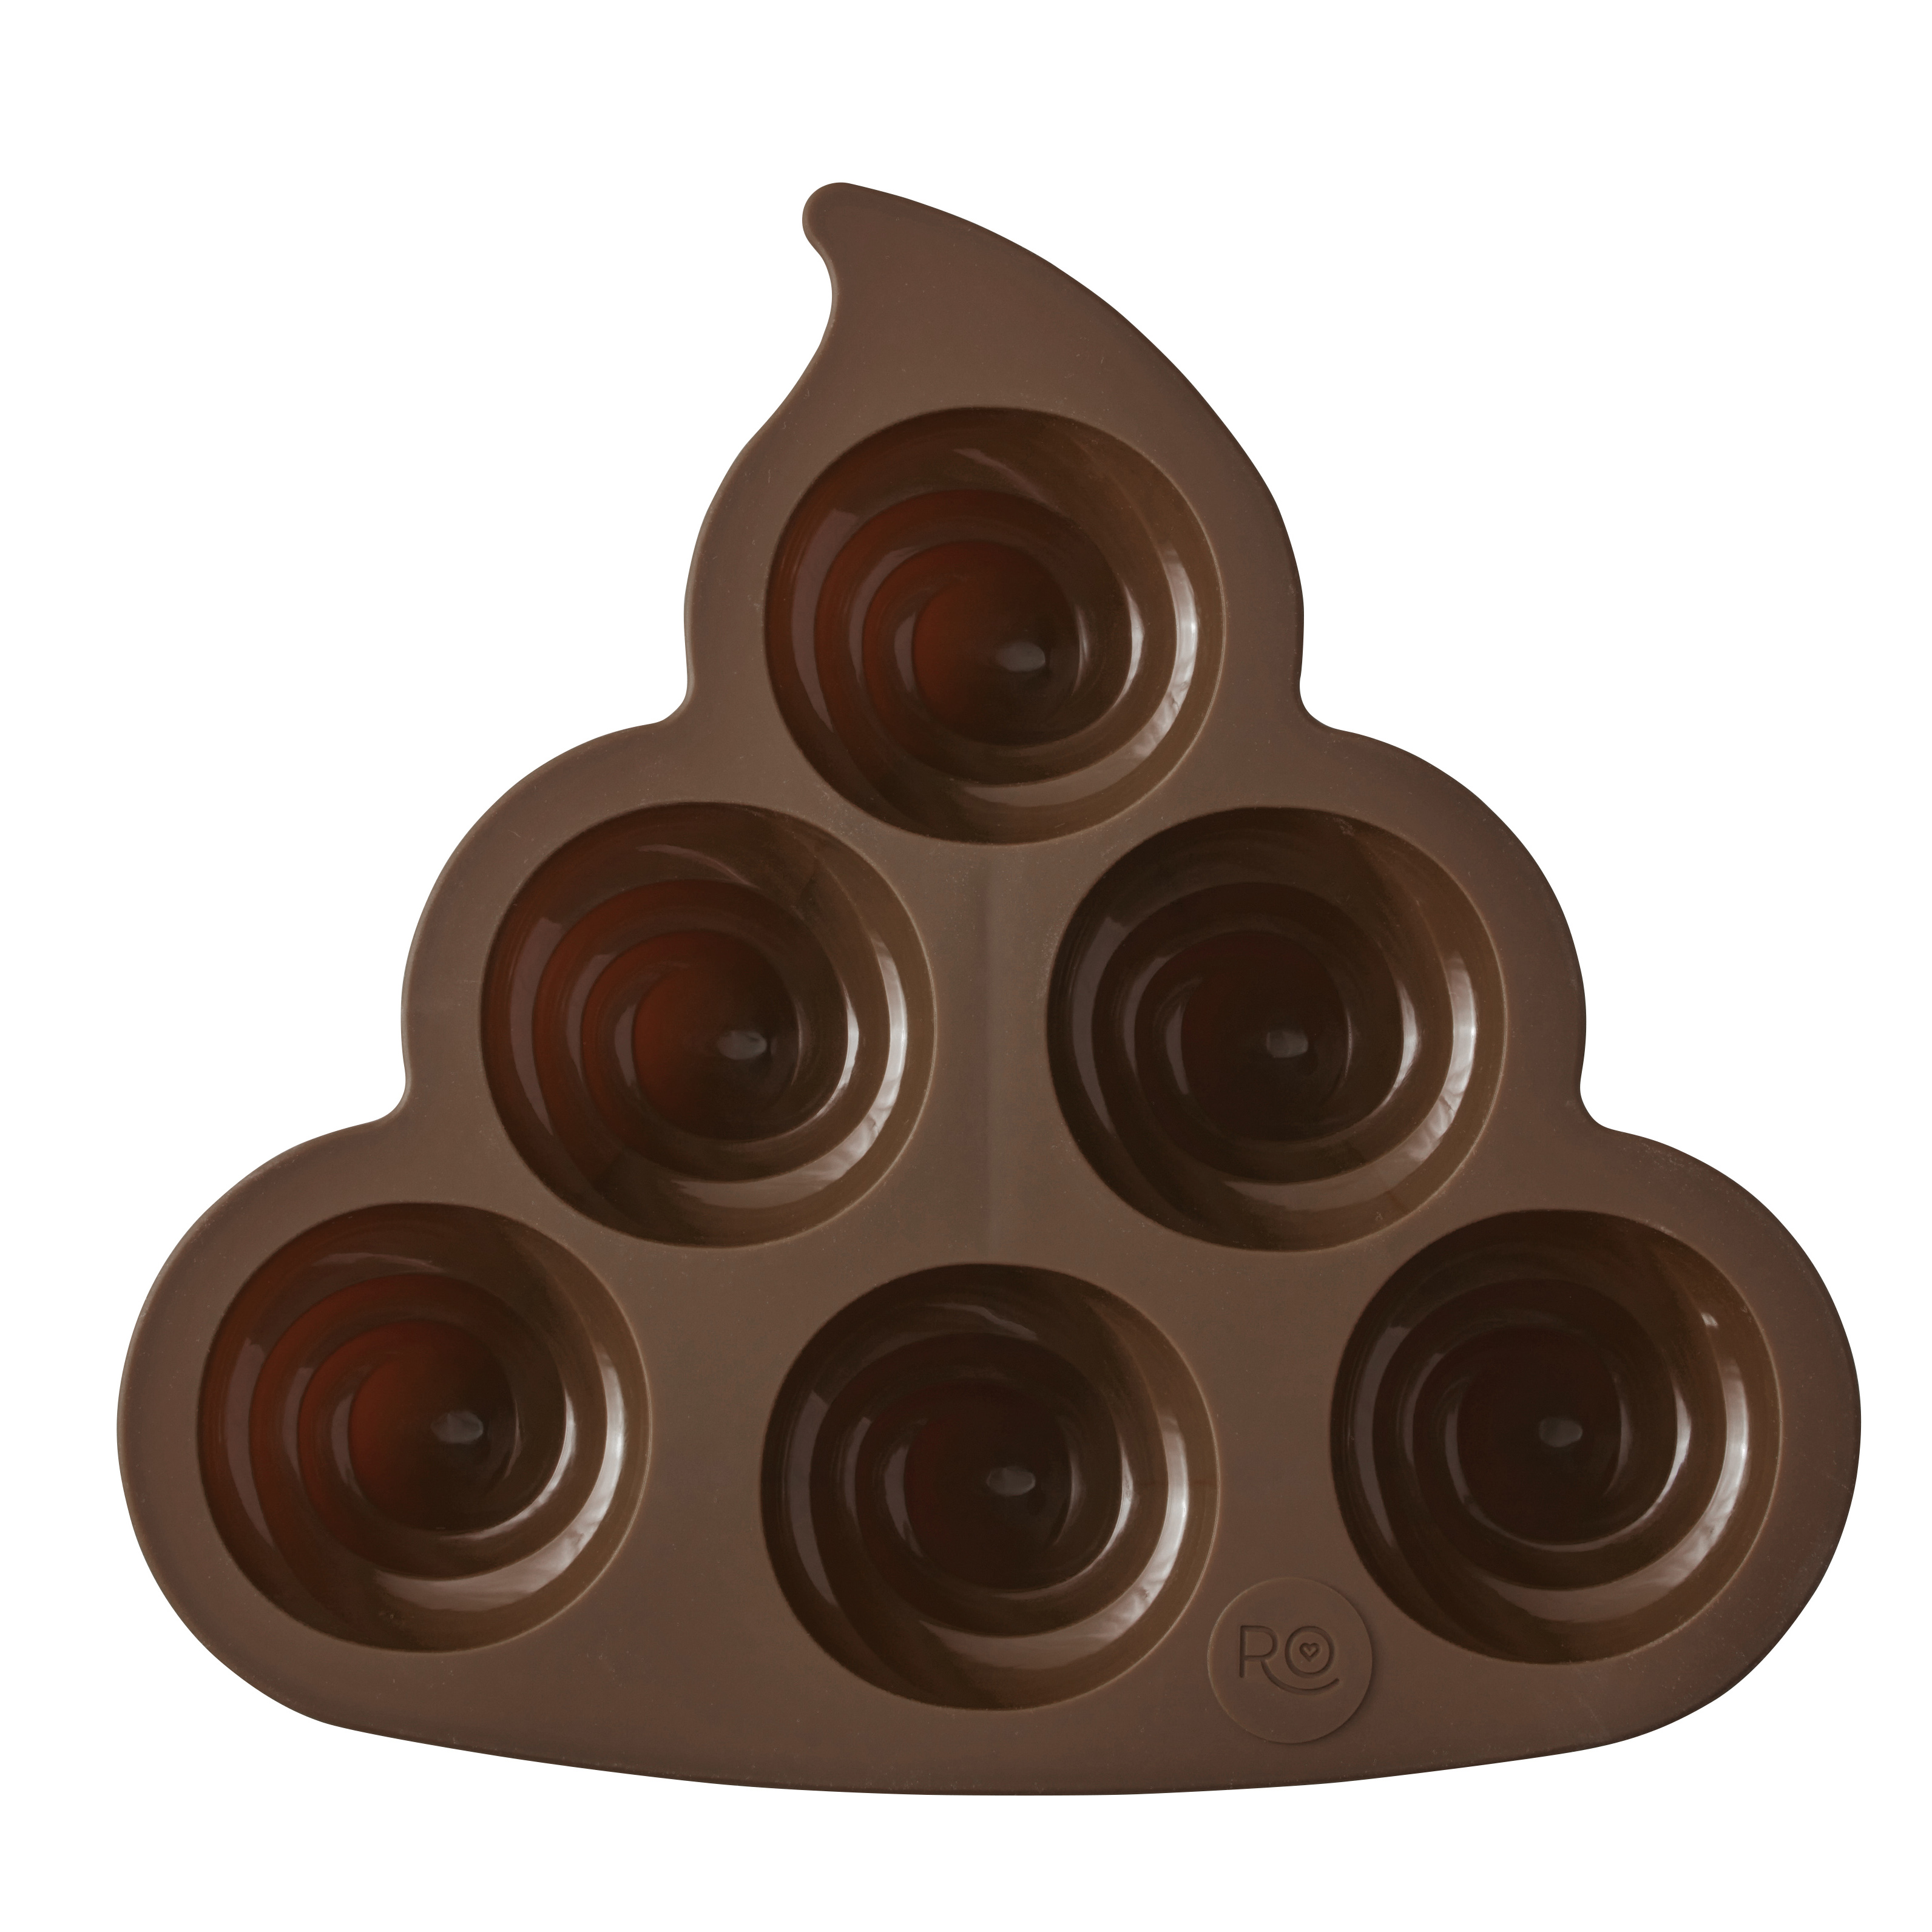 ROSANNA PANSINO by Wilton Silicone Poop Emoji Cake Pan - 6-Cavity Silicone Candy Mold - image 1 of 12